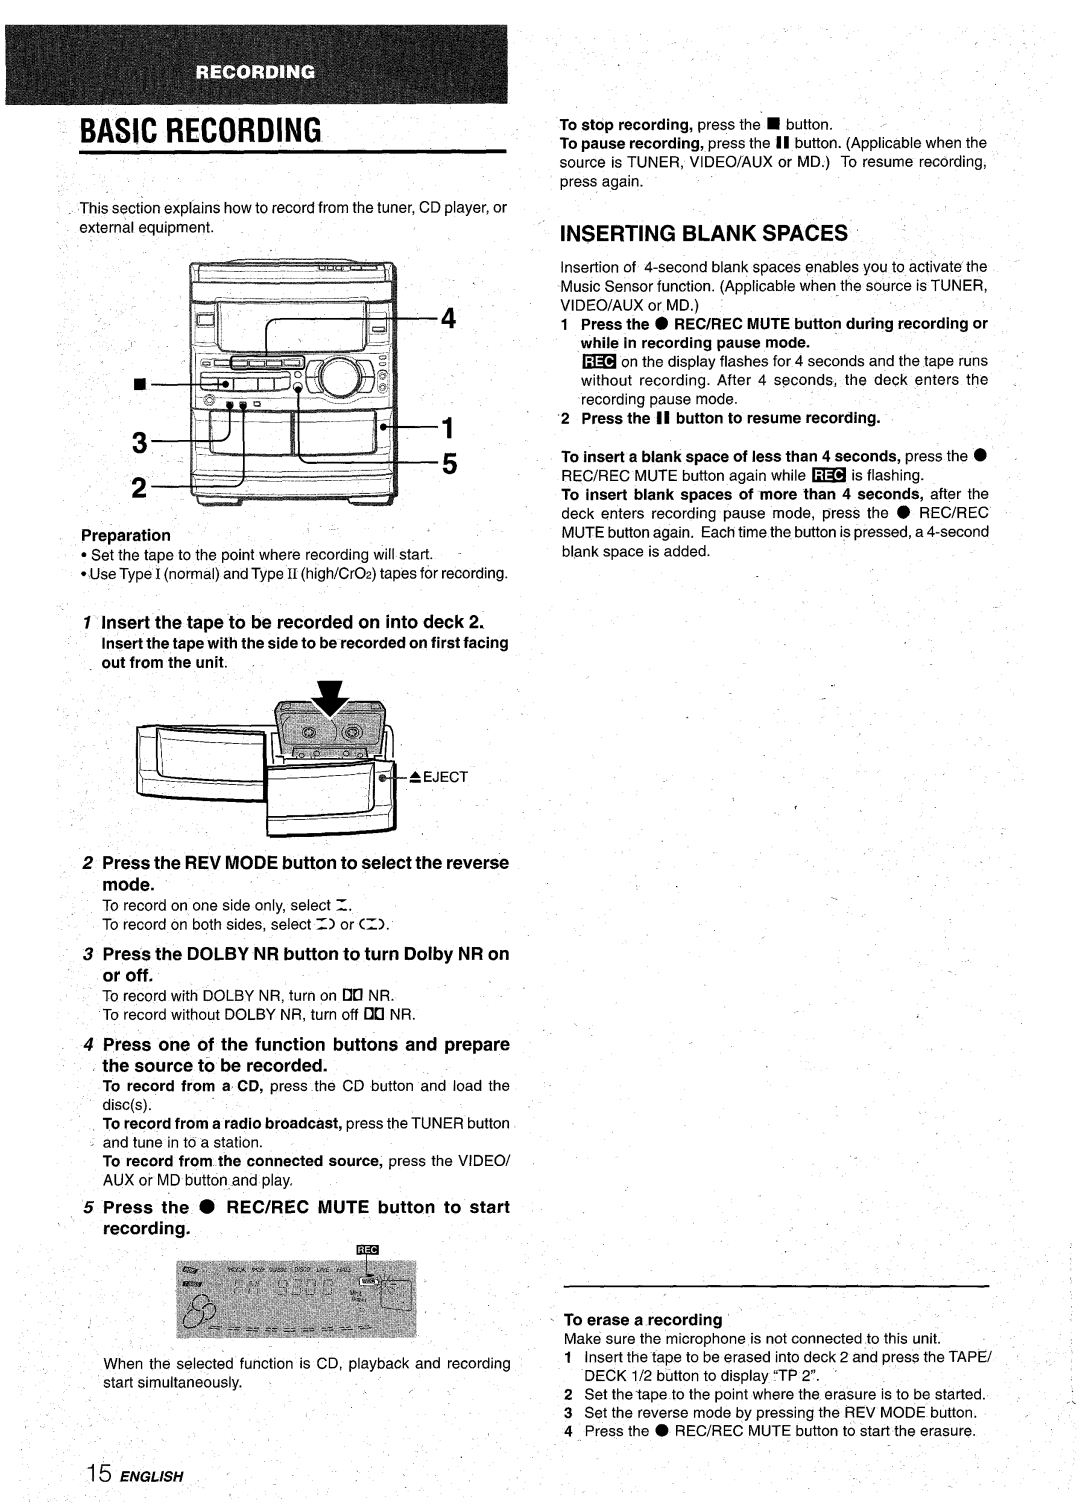 Aiwa CX-NA92 Inserting Blank Spaces, Insert the tape to be recorded on into deck, To stop recording, press the” button 